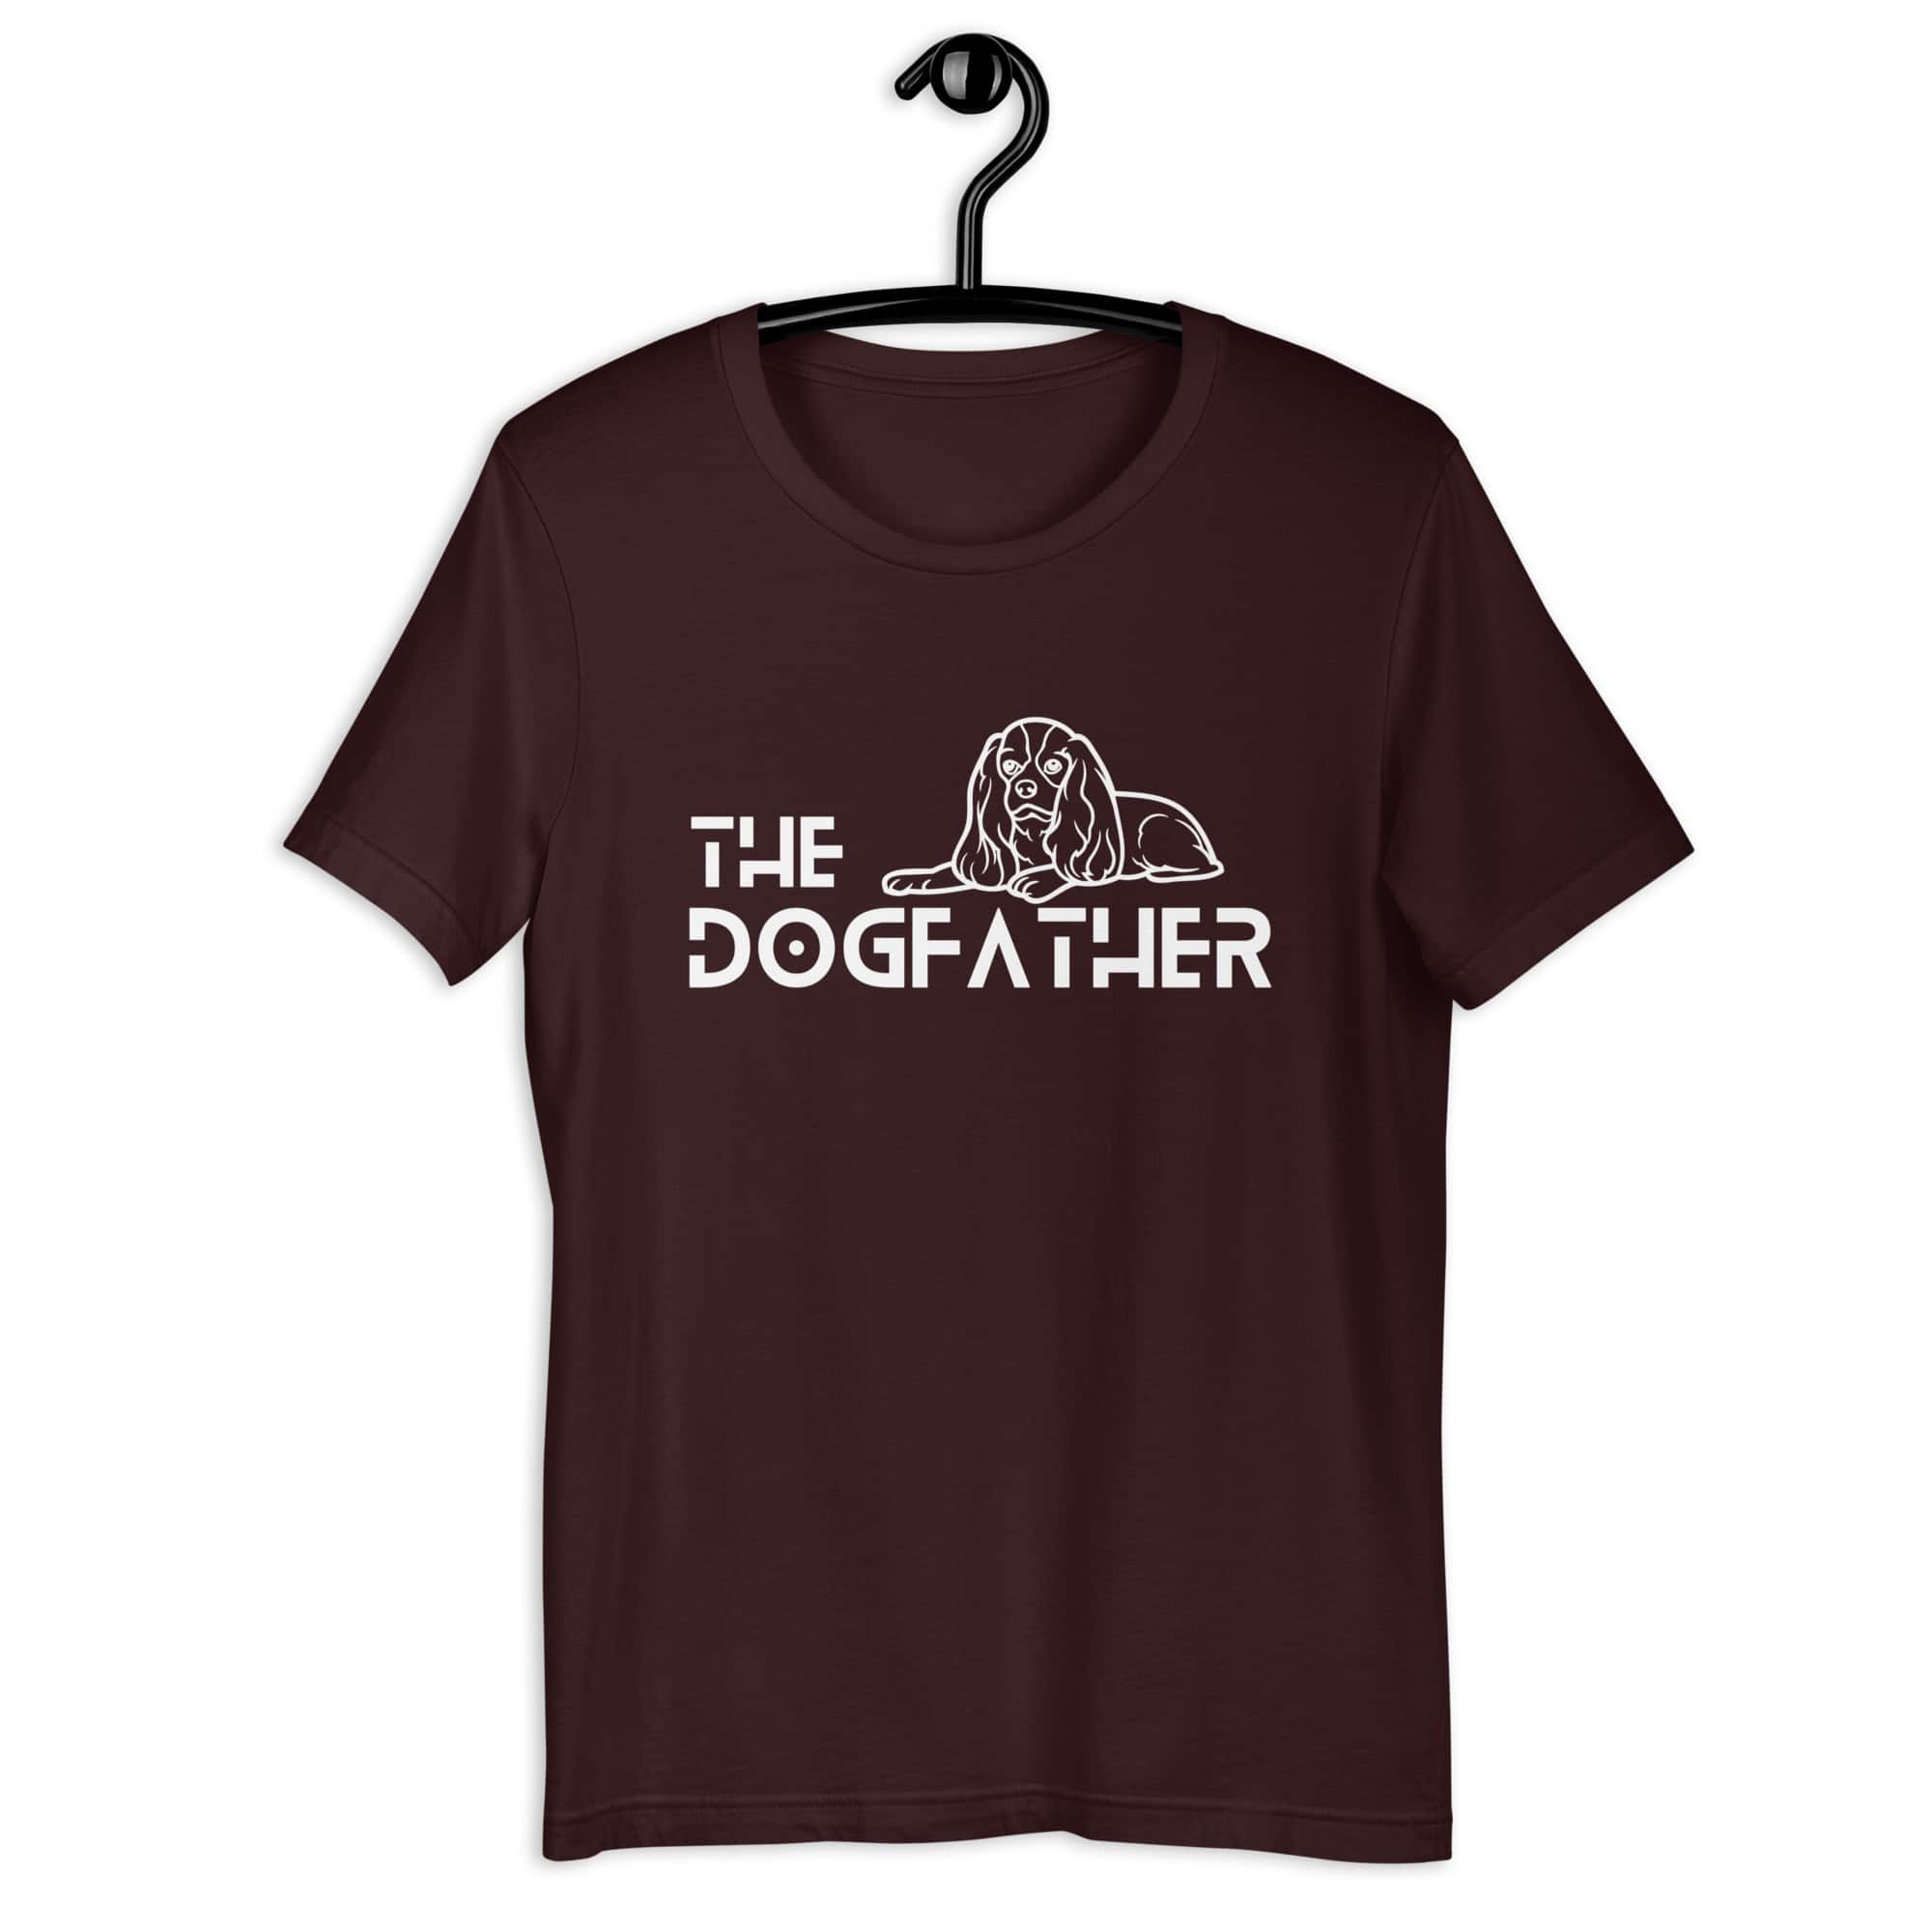 The Dogfather Hounds Unisex T-Shirt. Oxblood Black